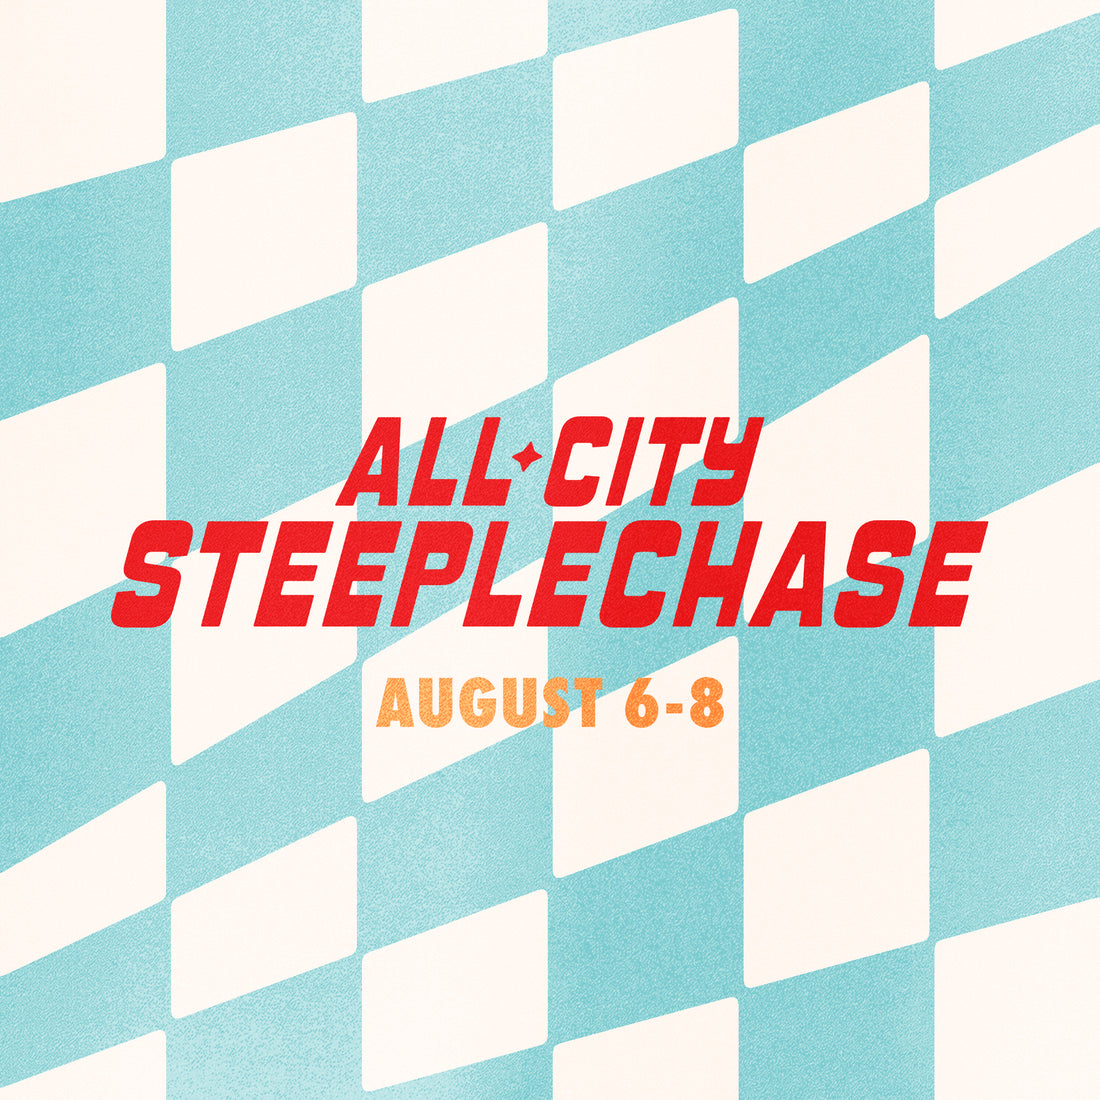 Chase Some Good Times with the All-City Steeplechase!